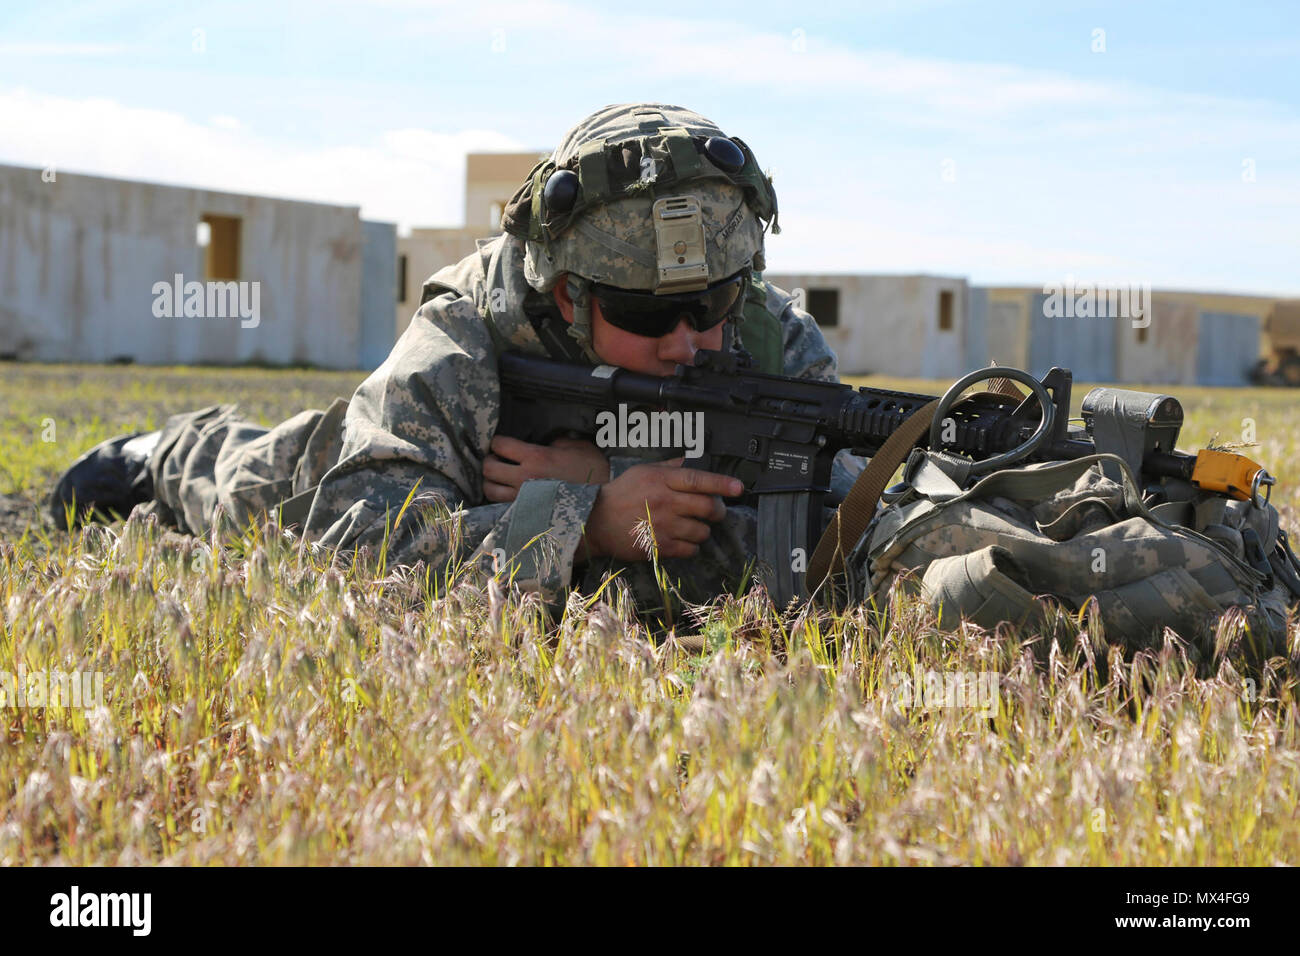 U.S. Army Sgt. Carlos Moran, 744th Ordnance Company (EOD), 184th Ordnance Disposal Battalion (EOD), 52nd Ordnance Group (EOD), pulls security outside a training village during a situational training exercise (STX) at the Yakima Training Center, Yakima, Wash., April 28, 2017. The final days of the CBRNE Leaders Course are comprised of STX lanes that test what the Soldiers' learned throughout the duration of the course. Stock Photo